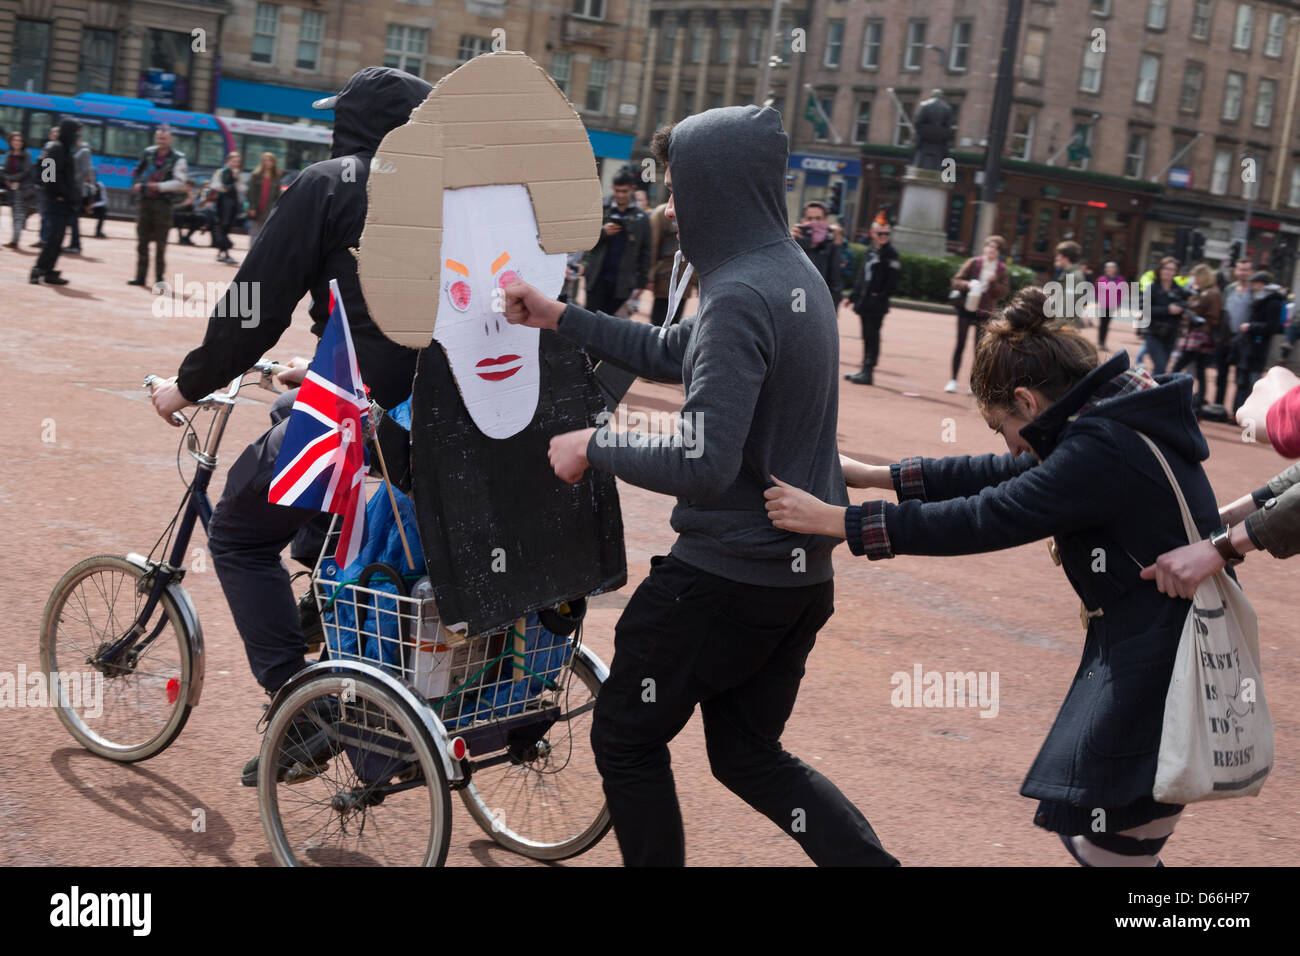 George Square, Glasgow, Scotland, UK. Saturday 13th April 2013. 'Thatcher is Dead' party, with an attempt to burn an effigy of British Conservative politician Baroness Margaret Thatcher, by young people, in George Square. Credit: Jeremy Sutton-hibbert /Alamy Live News Stock Photo